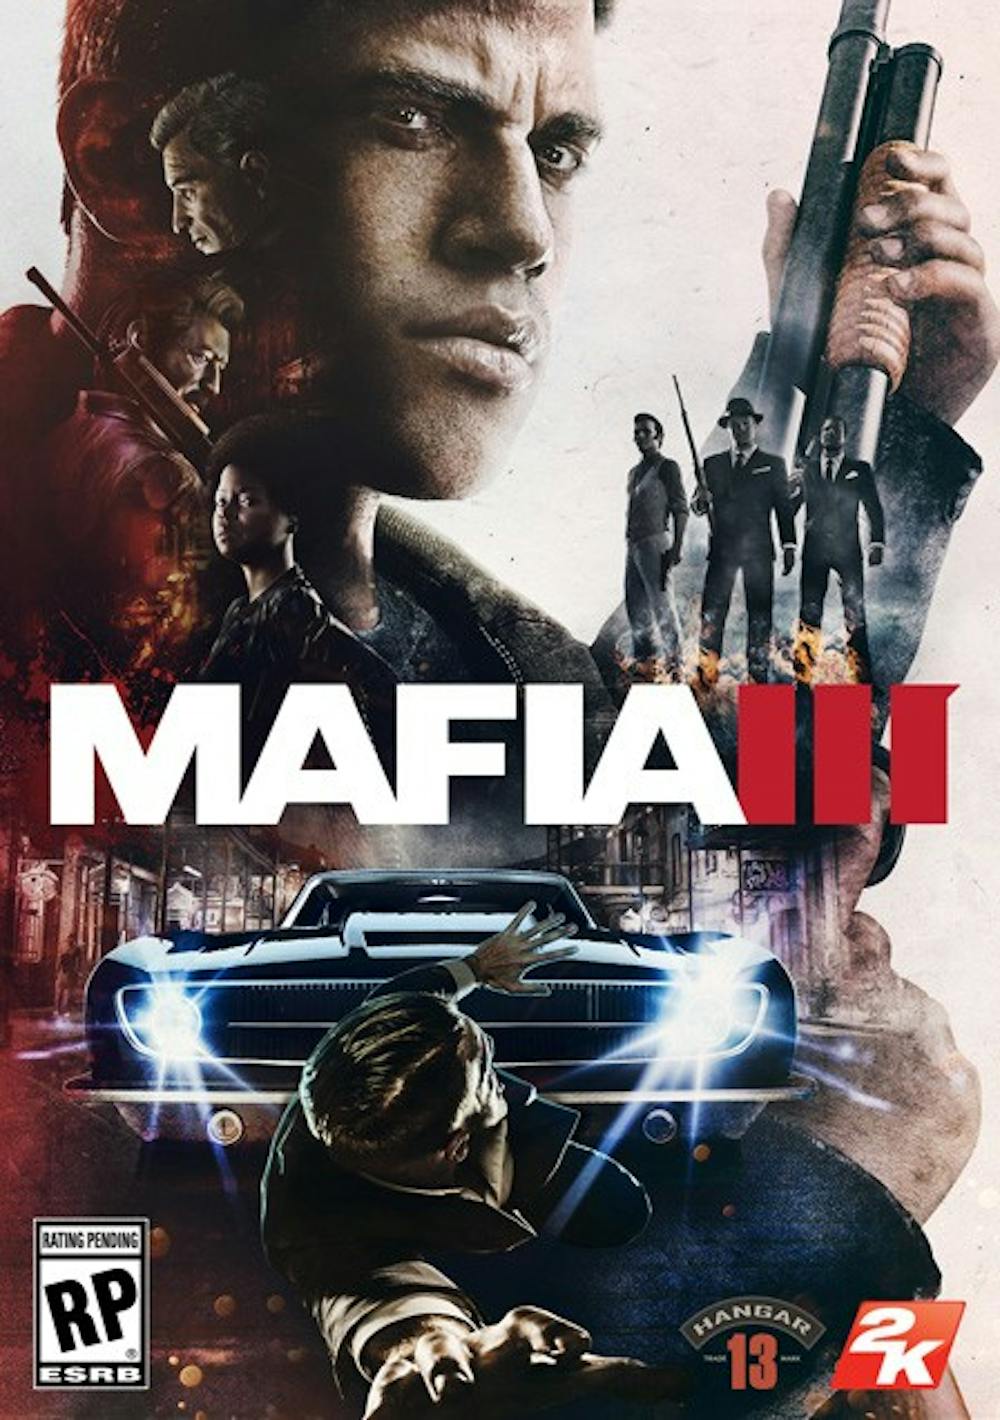 <p>“Mafia 3” has a large amount of content, with some players taking over 20 hours just to beat the main plotline &mdash; this is perhaps the one highlight of the game.</p>